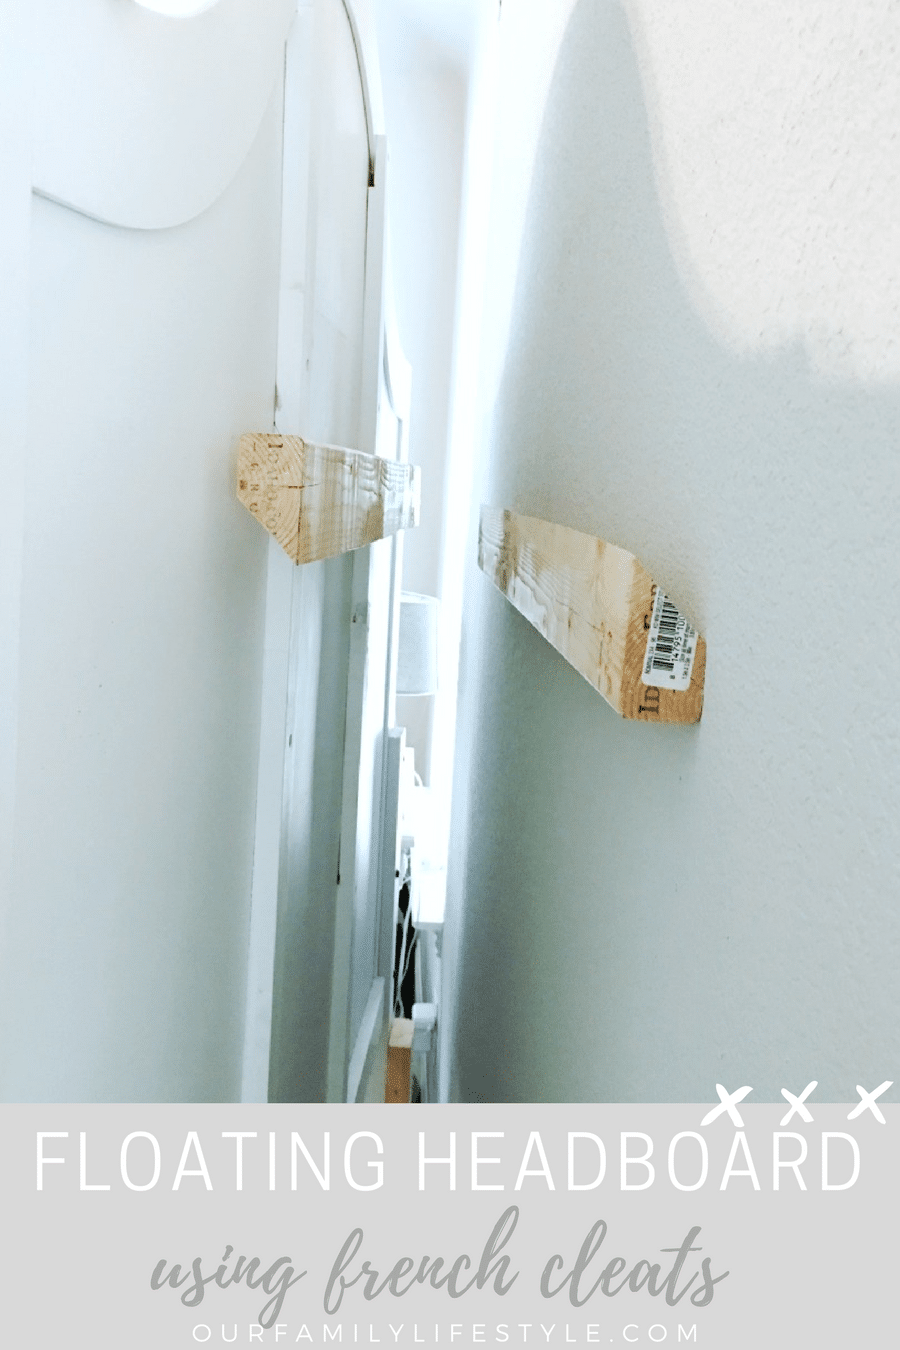 Headboard To The Wall Using French Cleats, How To Mount A Headboard The Wall Hardware